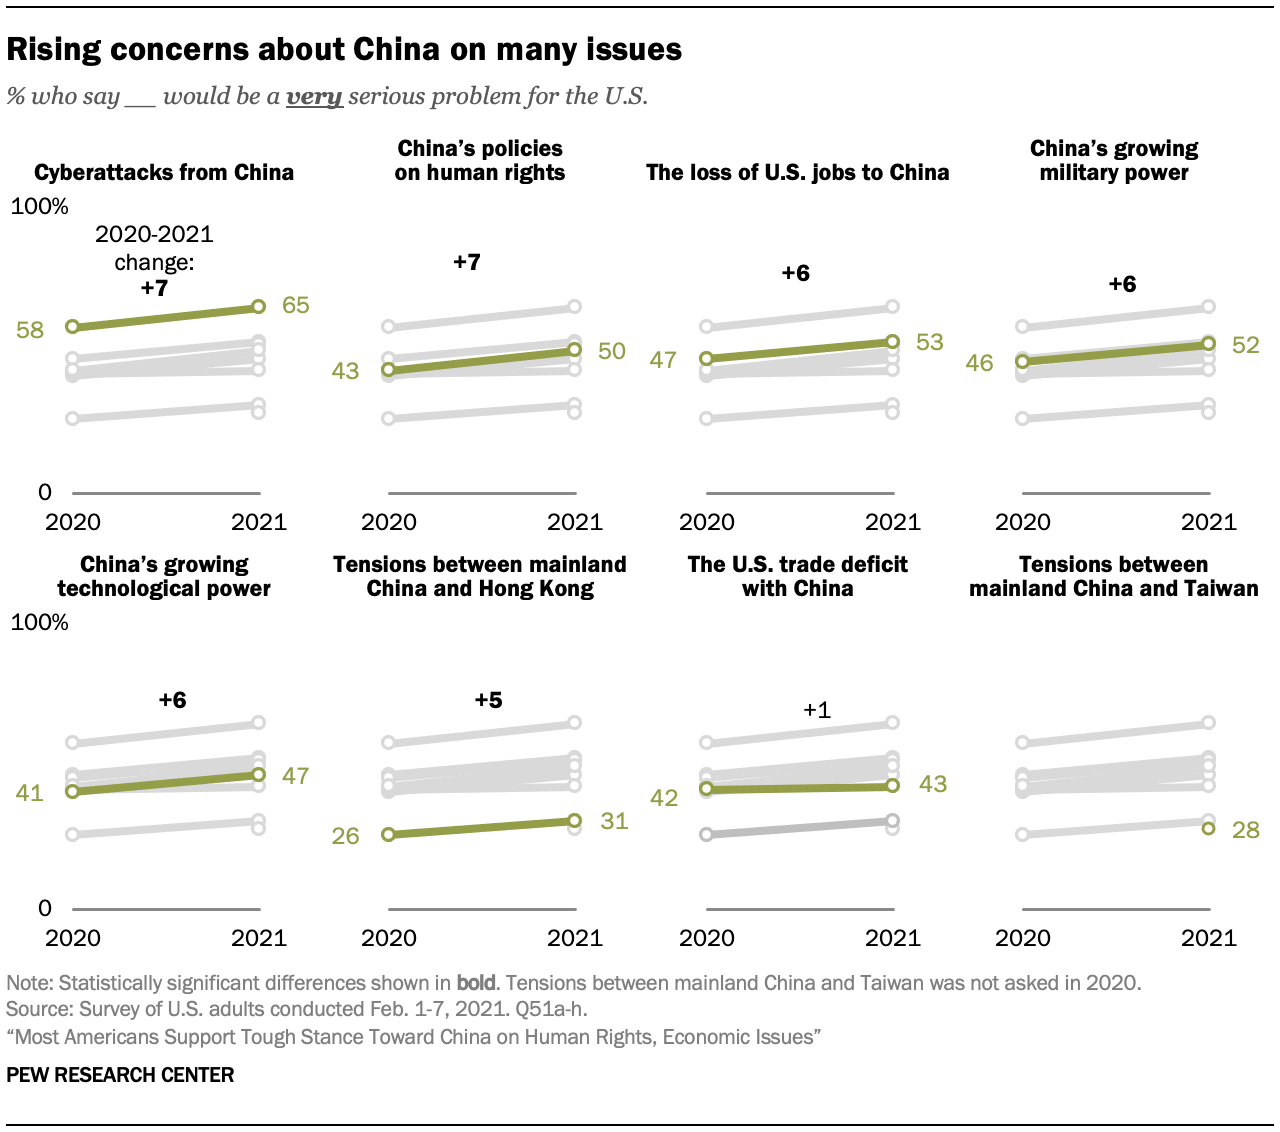 Rising concerns about China on many issues